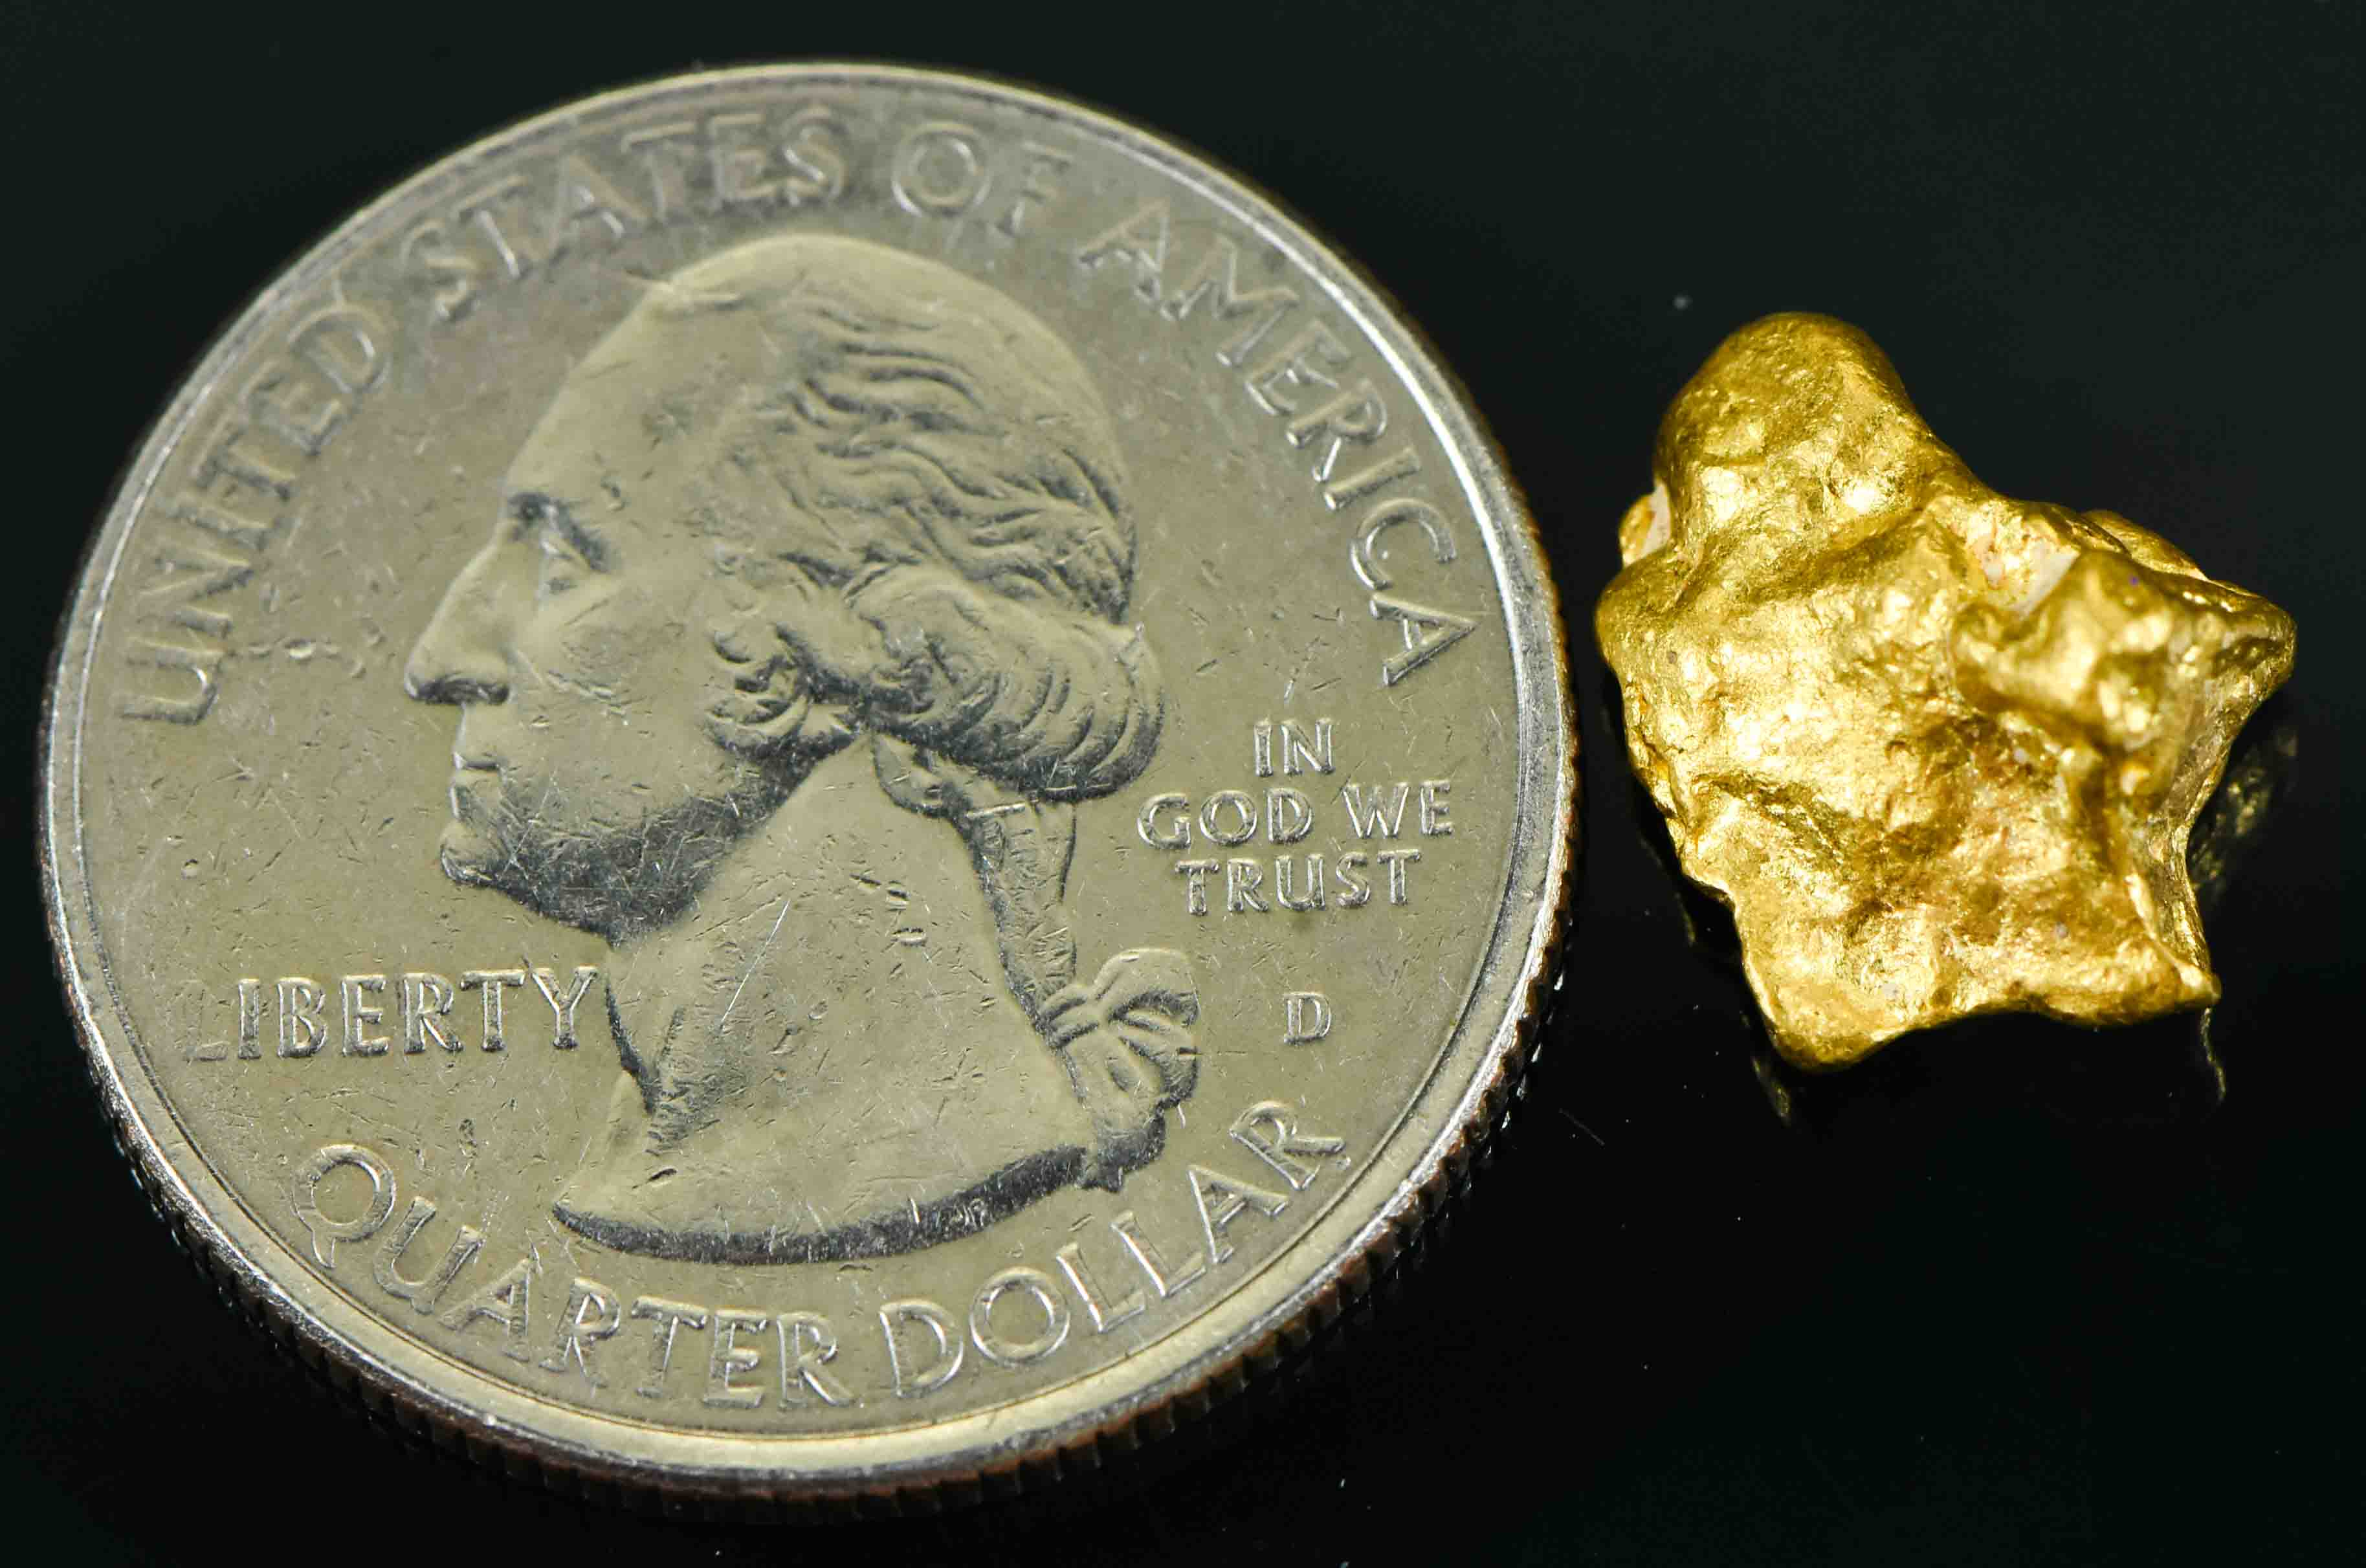 #28 Australian Natural Gold Nugget With Quartz Weighs 3.67 Grams.